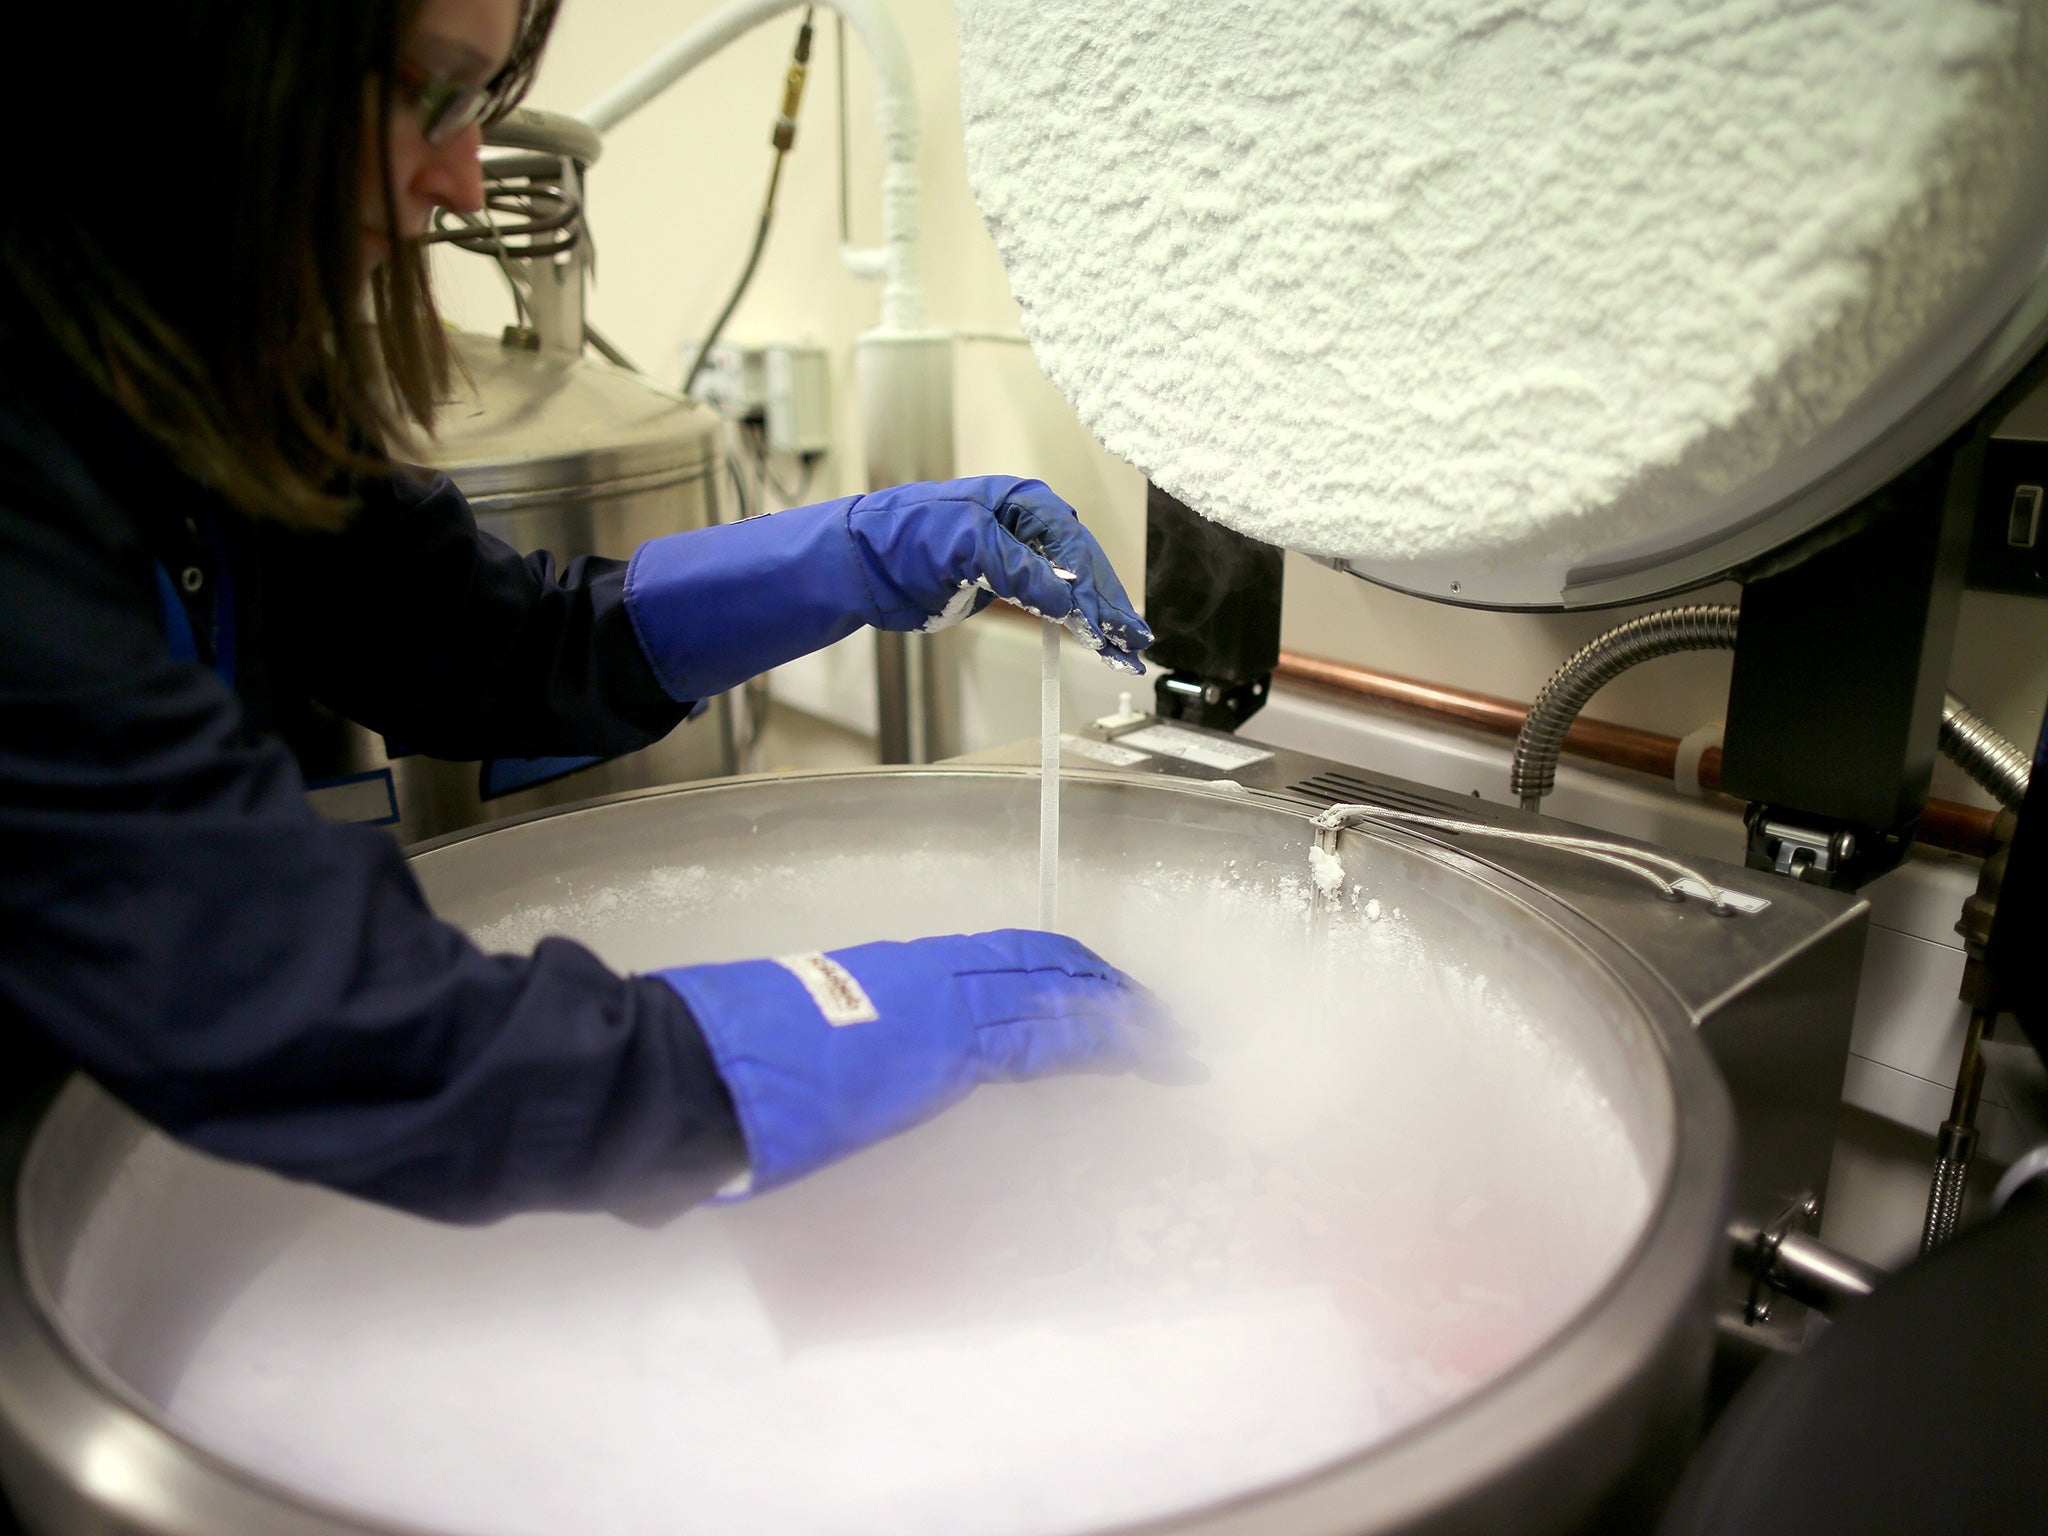 &#13;
Sperm and embryo samples in the cryo store at Birmingham Women's Hospital fertility clinic &#13;